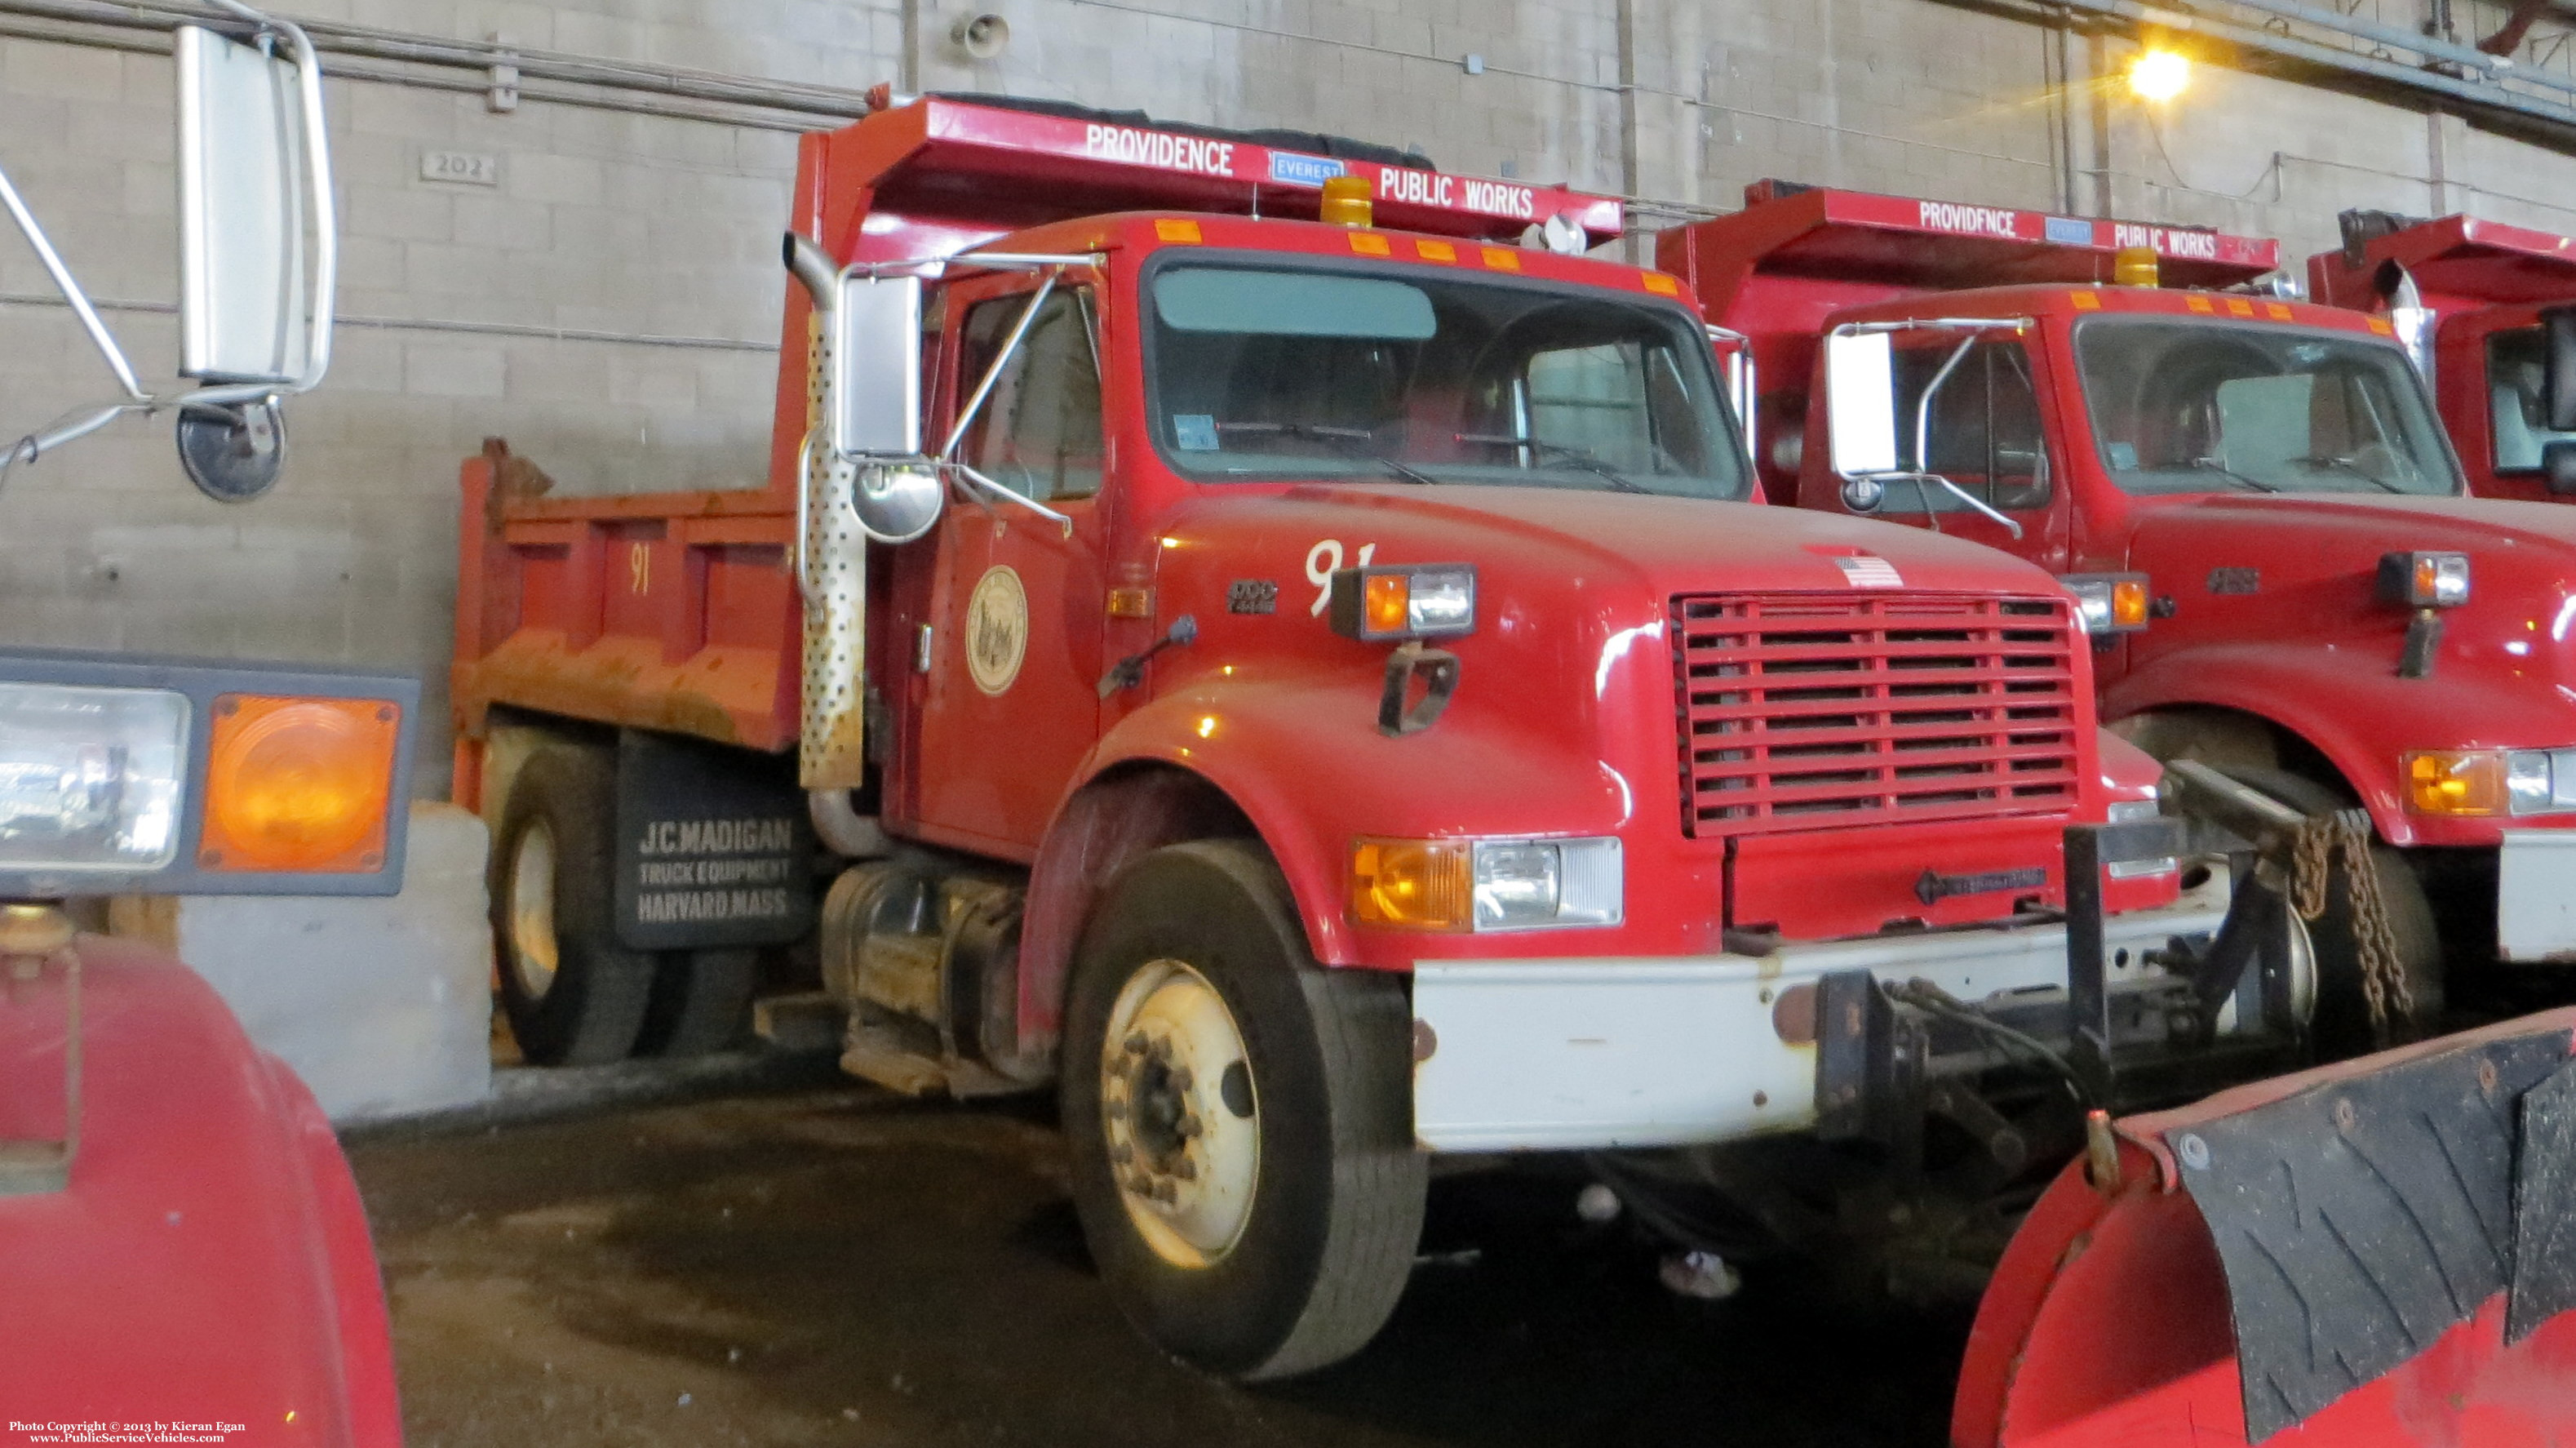 A photo  of Providence Highway Division
            Truck 91, a 1989-2001 International 4700             taken by Kieran Egan